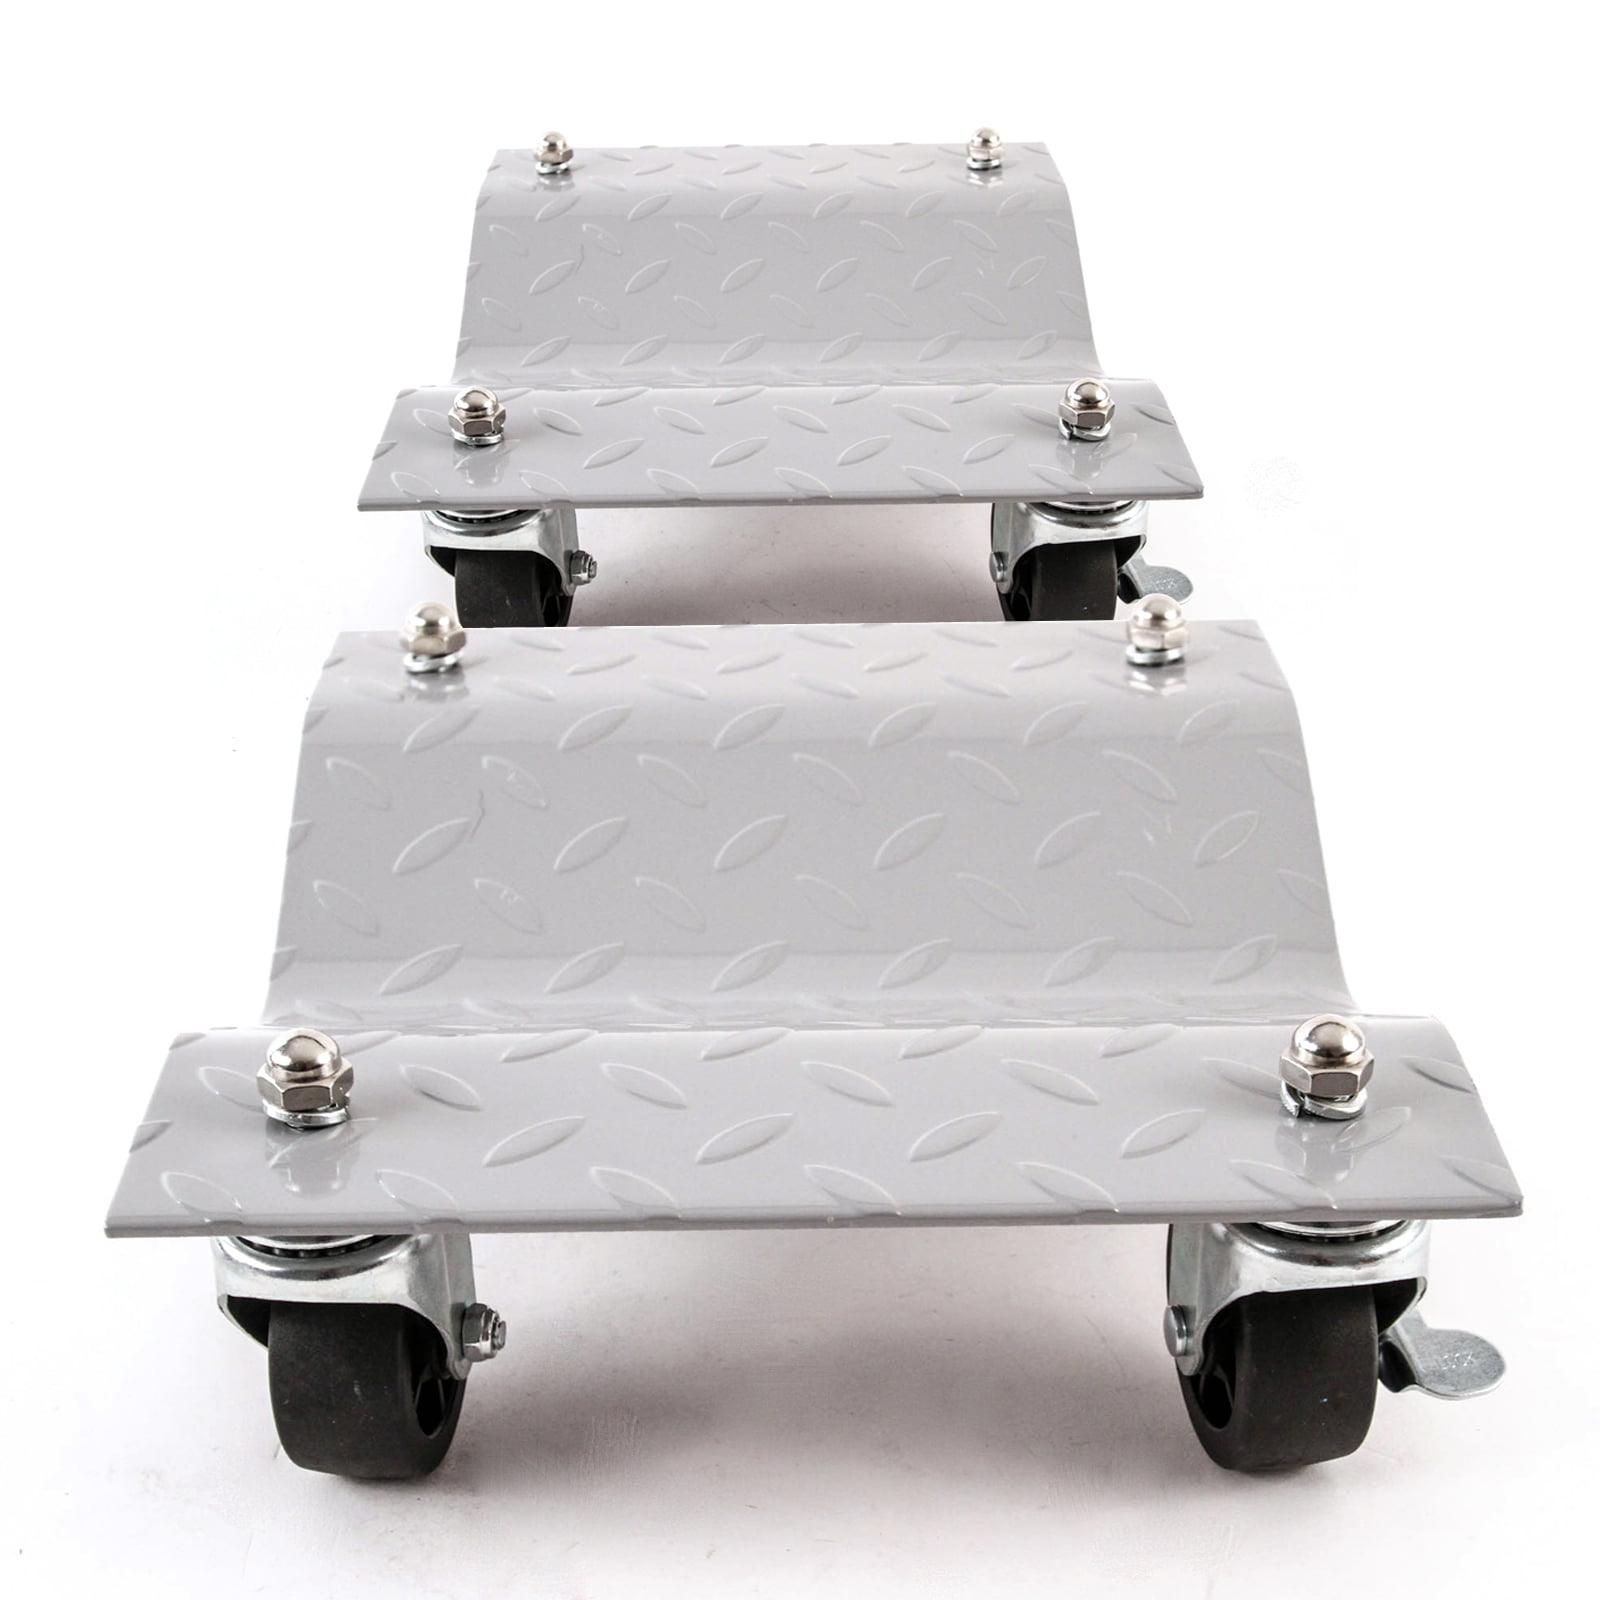 WHEEL DOLLIES DOLLY VEHICLE 2 PCS SET CAR SLIDE STRONG PACKING PROFESSIONAL 